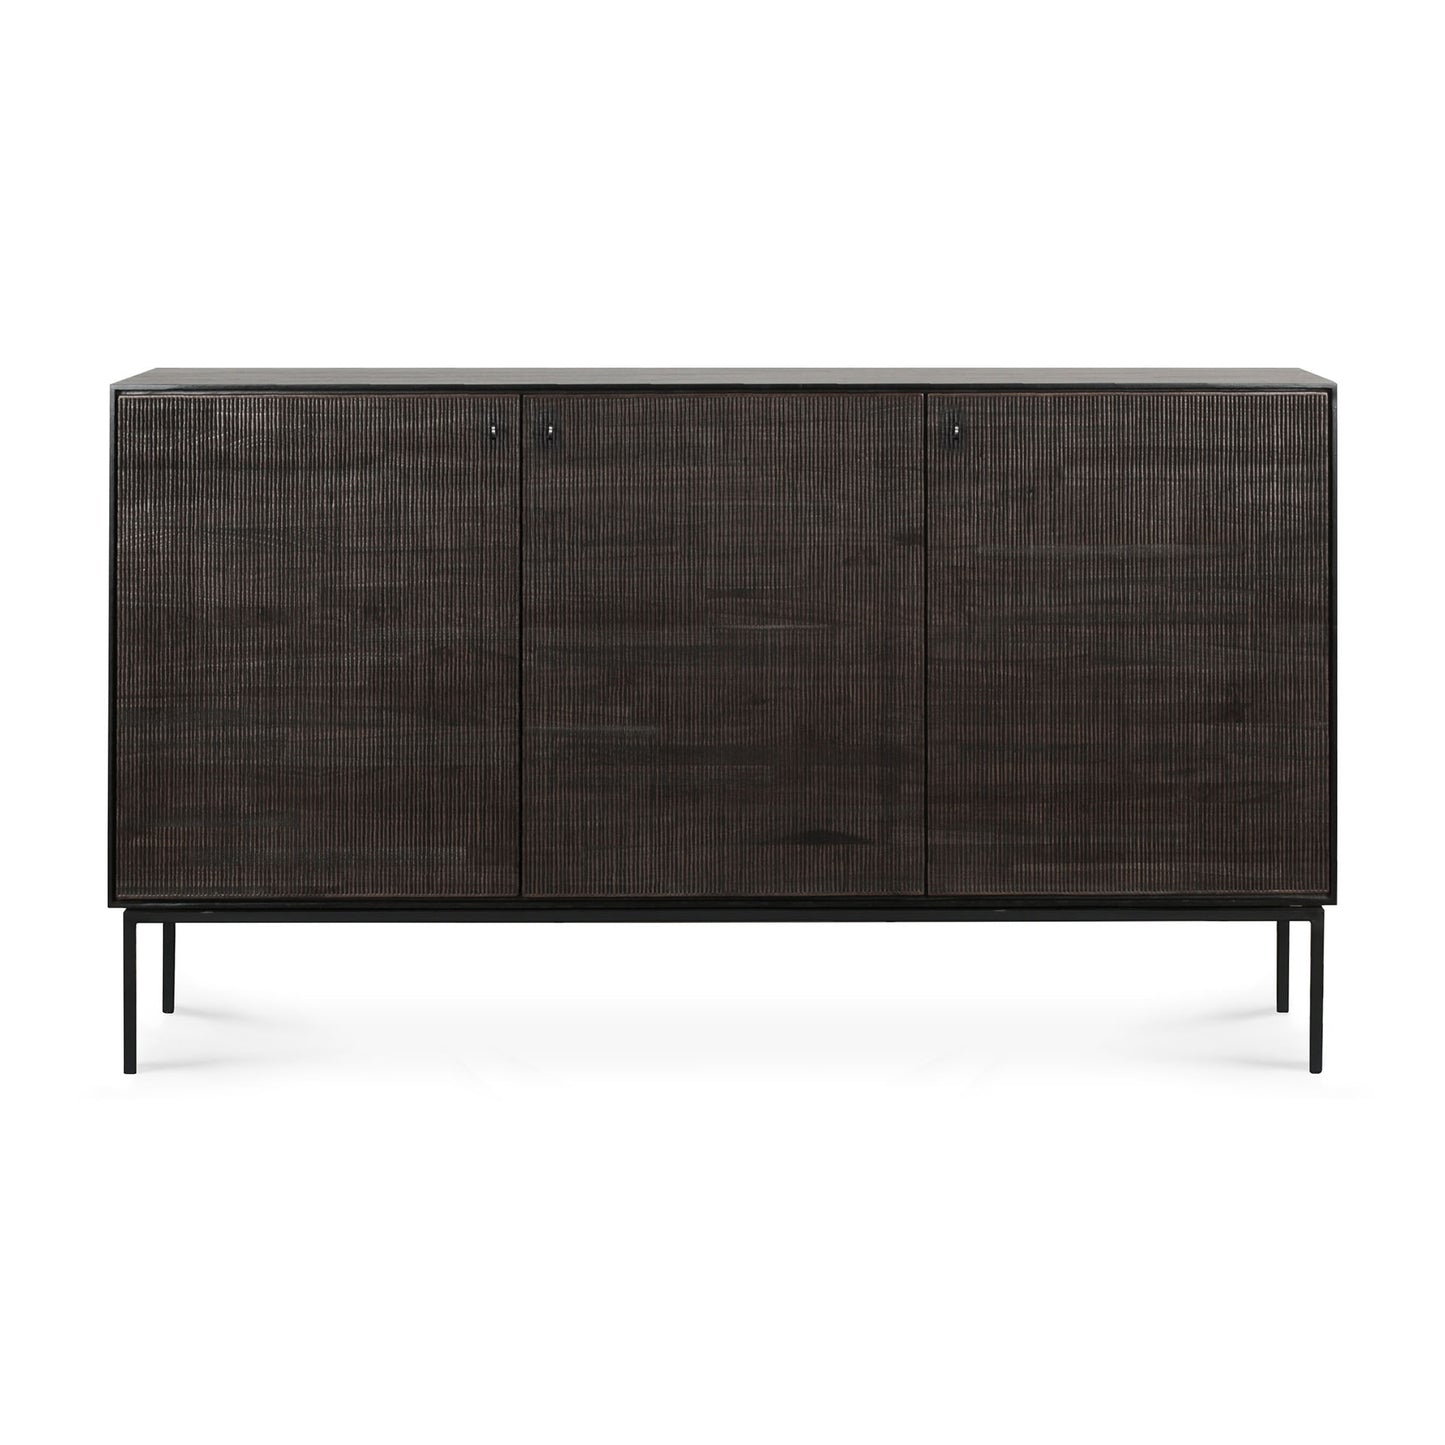 Ethnicraft Teak Grooves Sideboard Buffet is available from Make Your House A Home, Bendigo, Victoria, Australia